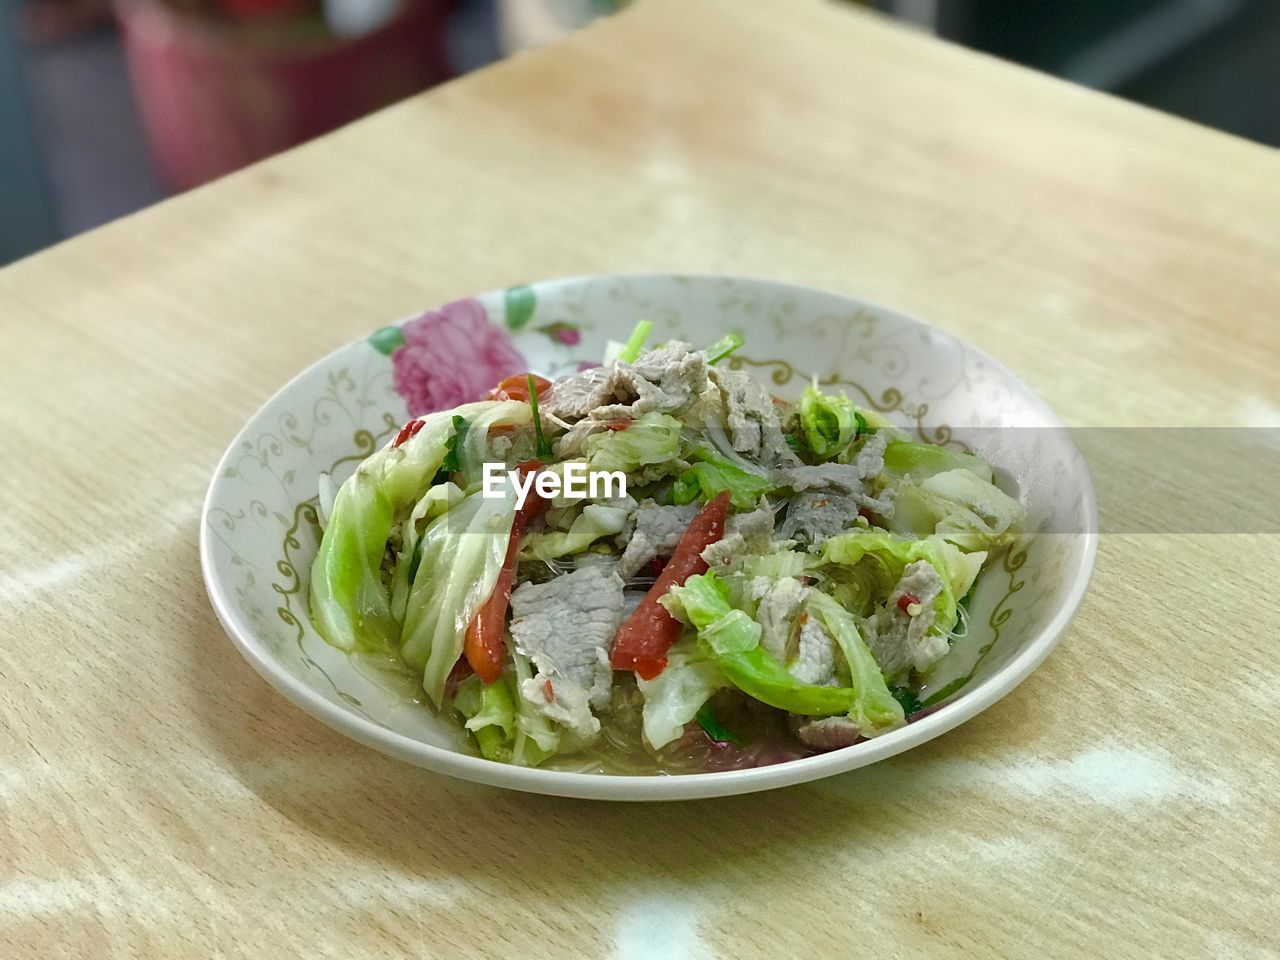 CLOSE-UP OF SALAD SERVED IN BOWL